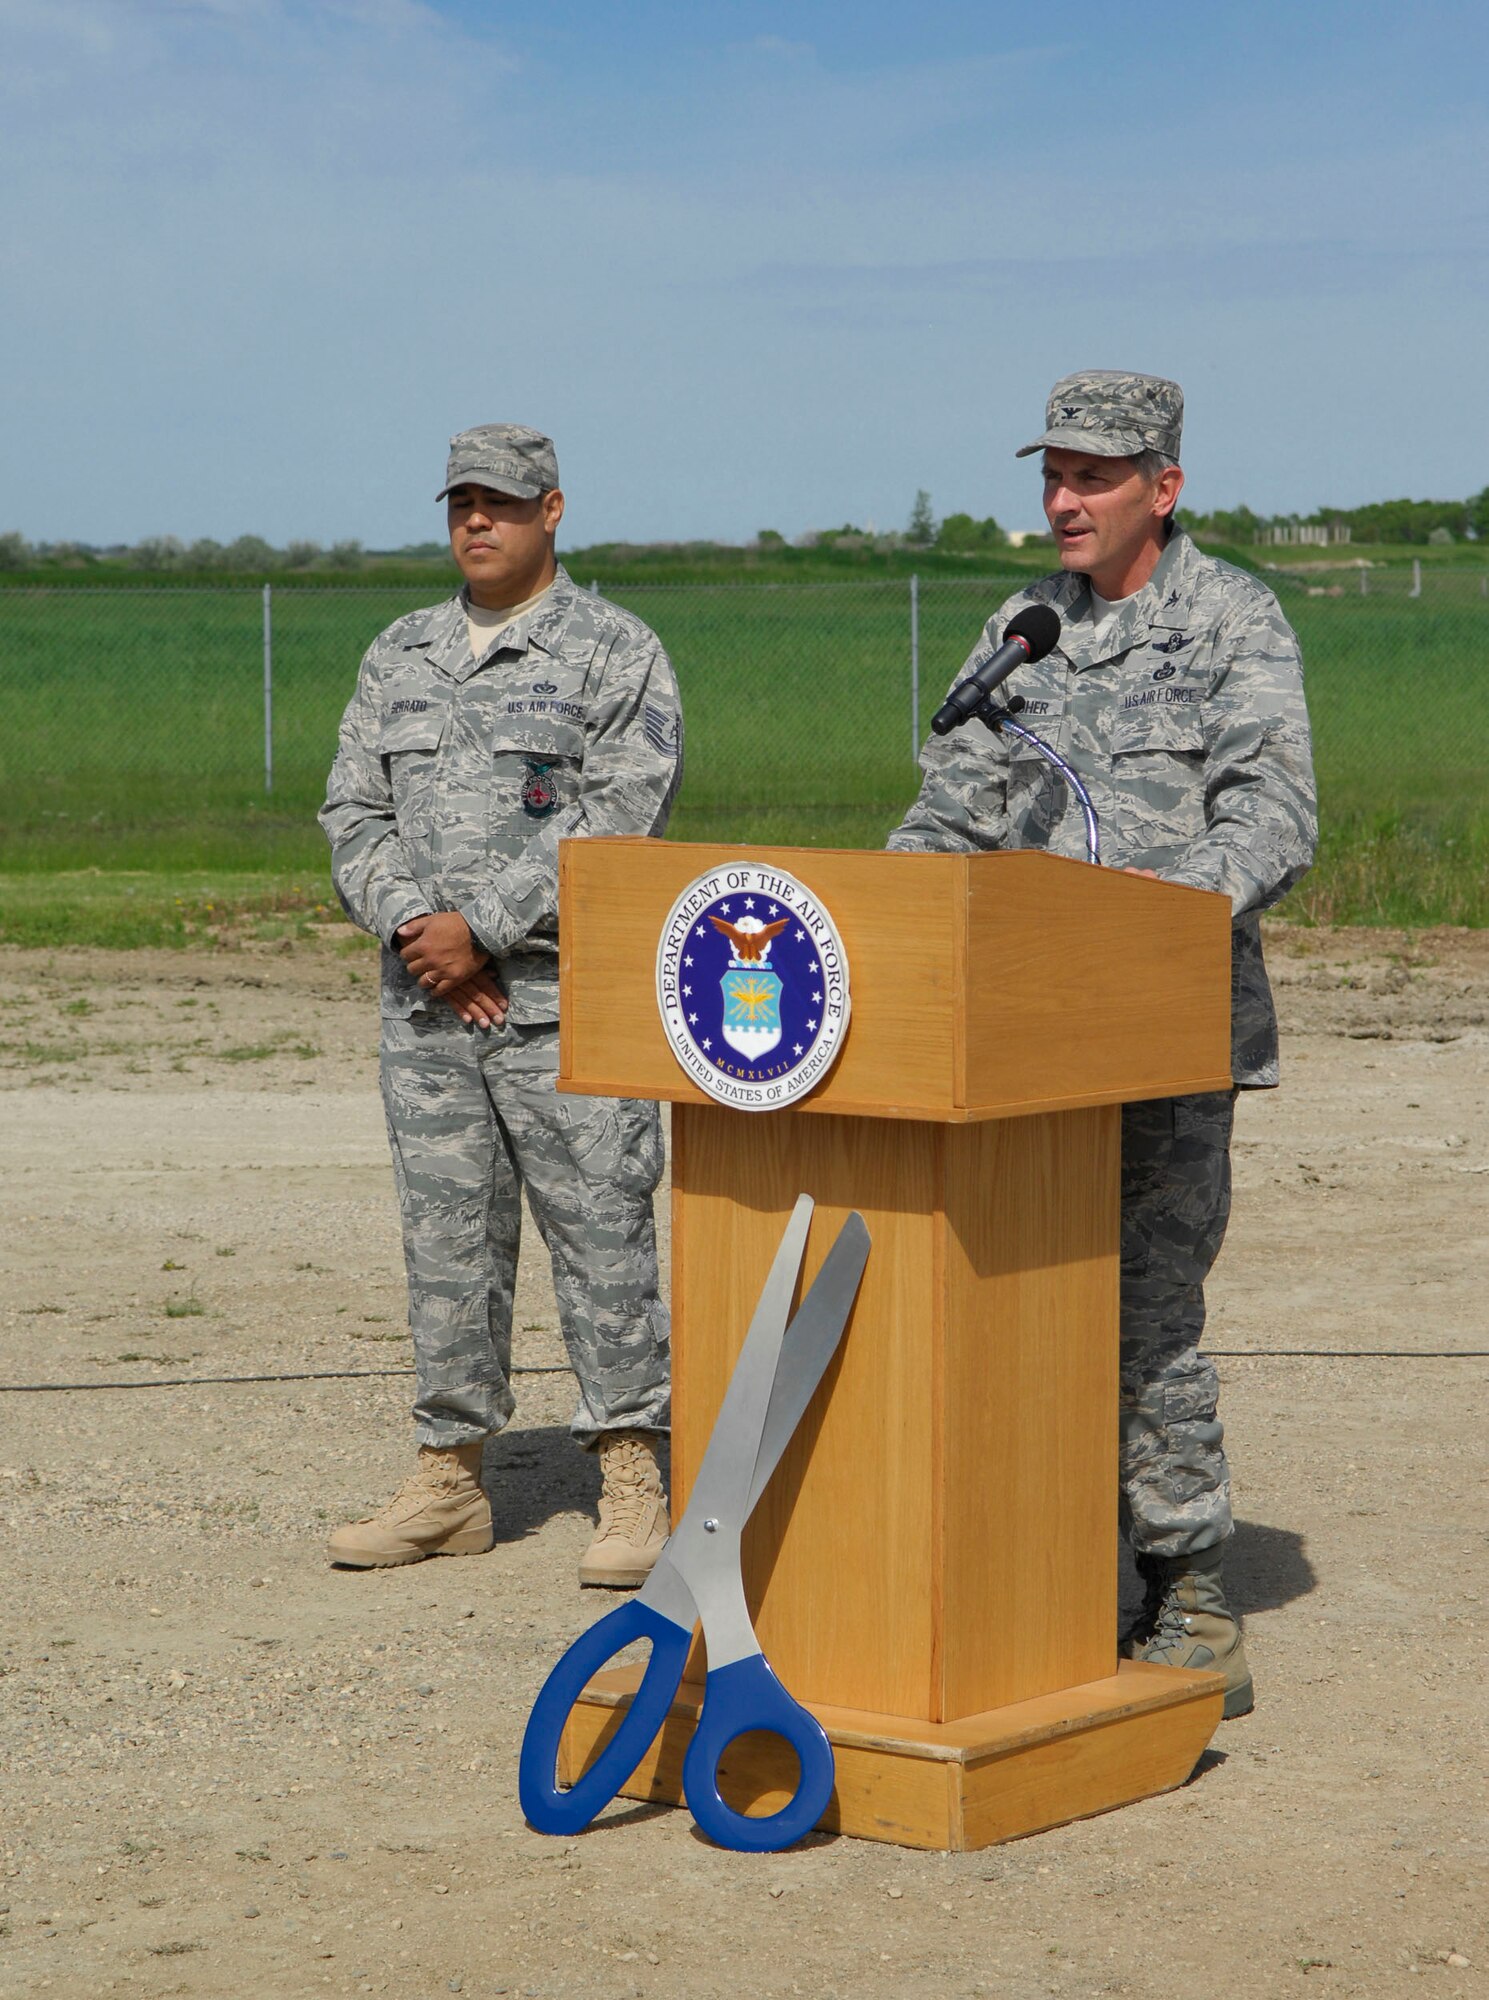 MINOT AIR FORCE BASE, N.D. -- Col. James Gallagher, 5th Mission Support Group commander, explains the importance of the new five-story structural fire trainer during the ribbon cutting ceremony here June 7. The new fire training facility can be used in any type of weather to increase the readiness of base and local community firefighters. (U.S. Air Force photo by Senior Airman Ashley N. Avecilla)